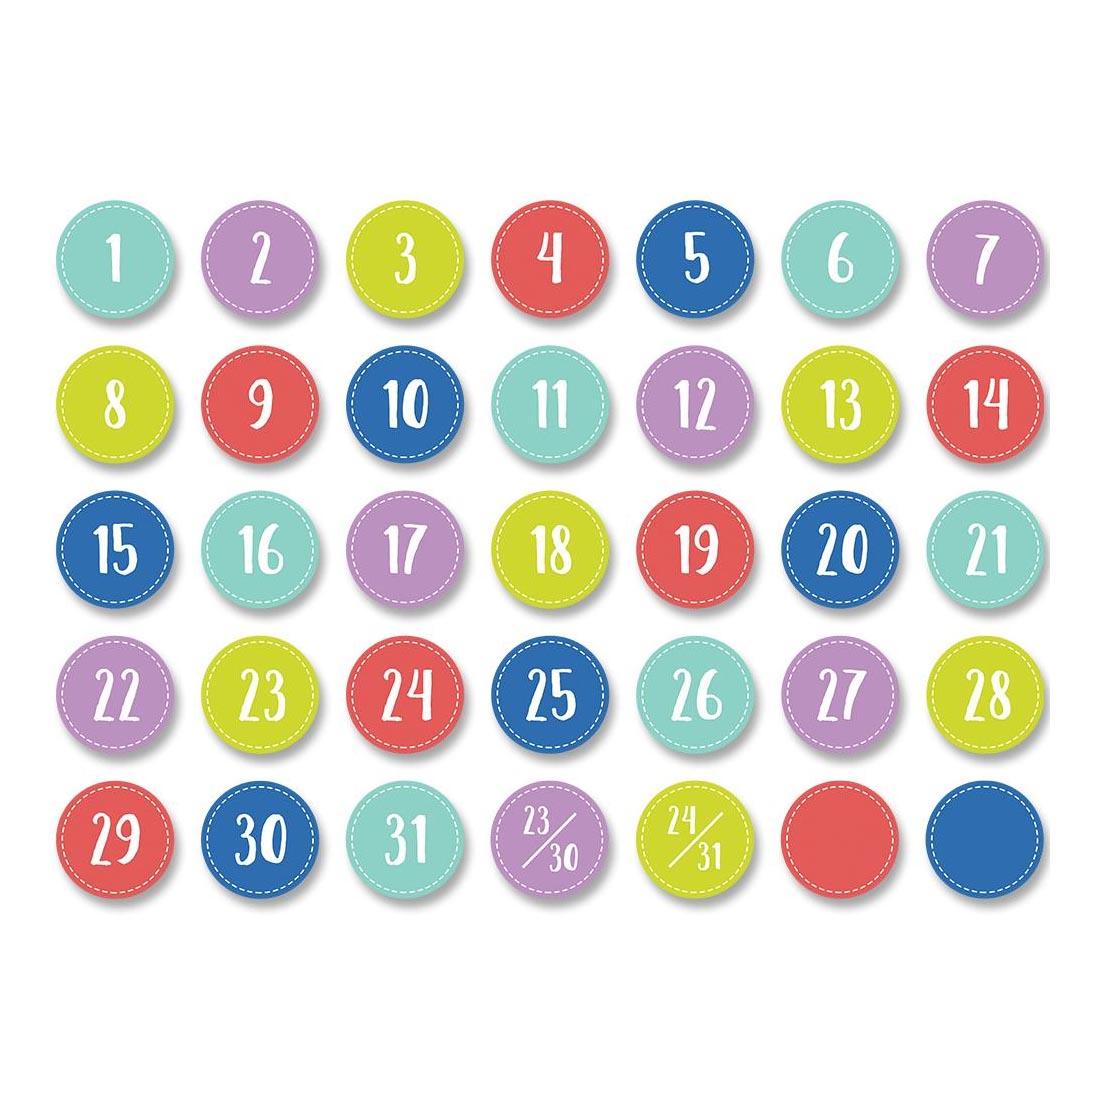 Calendar Days from the Color Pop collection by Creative Teaching Press